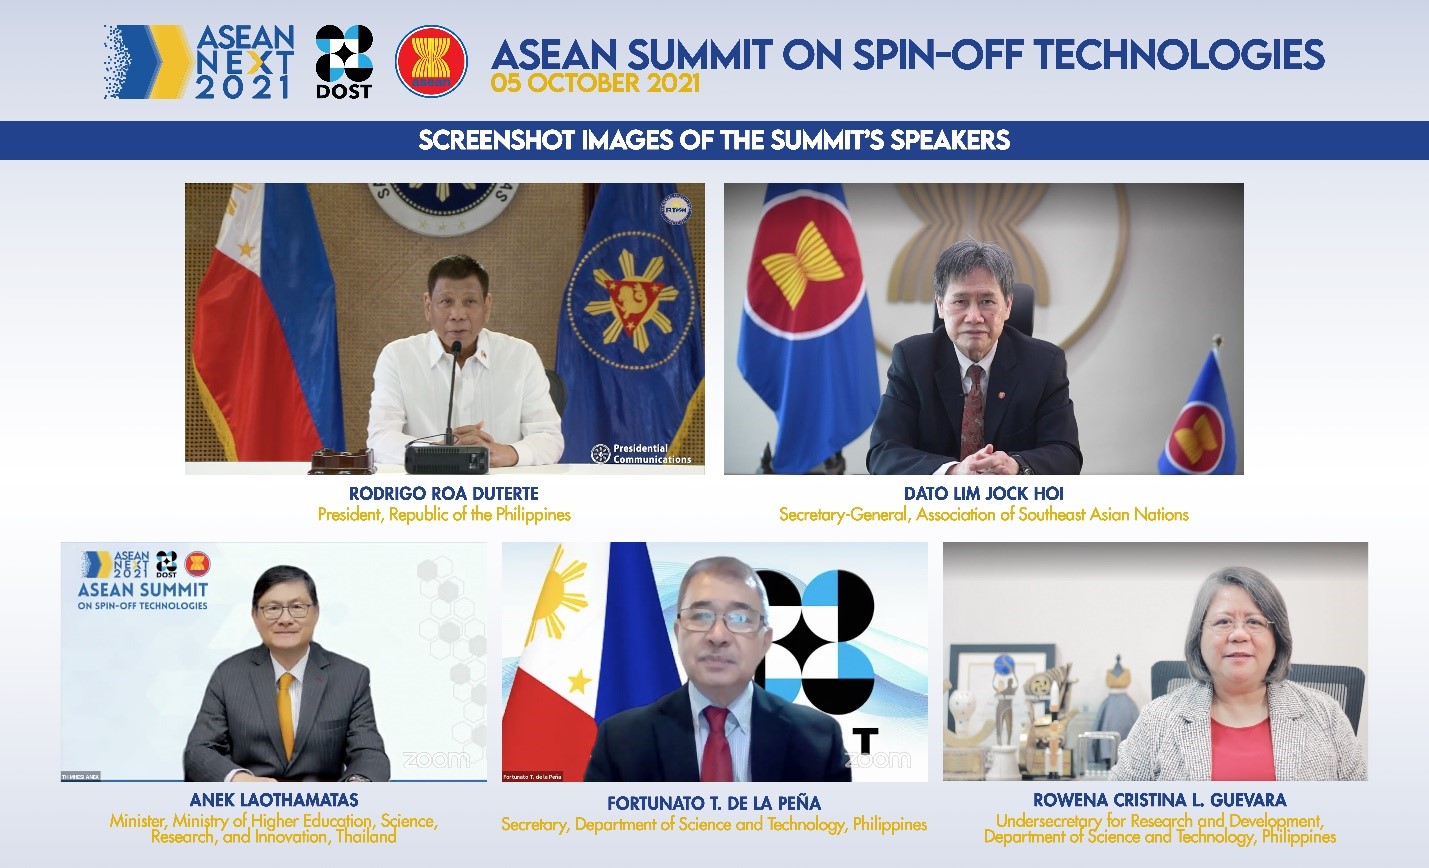 PH’s DOST spotlights spin-off technologies at the ASEAN NEXT 2021 image